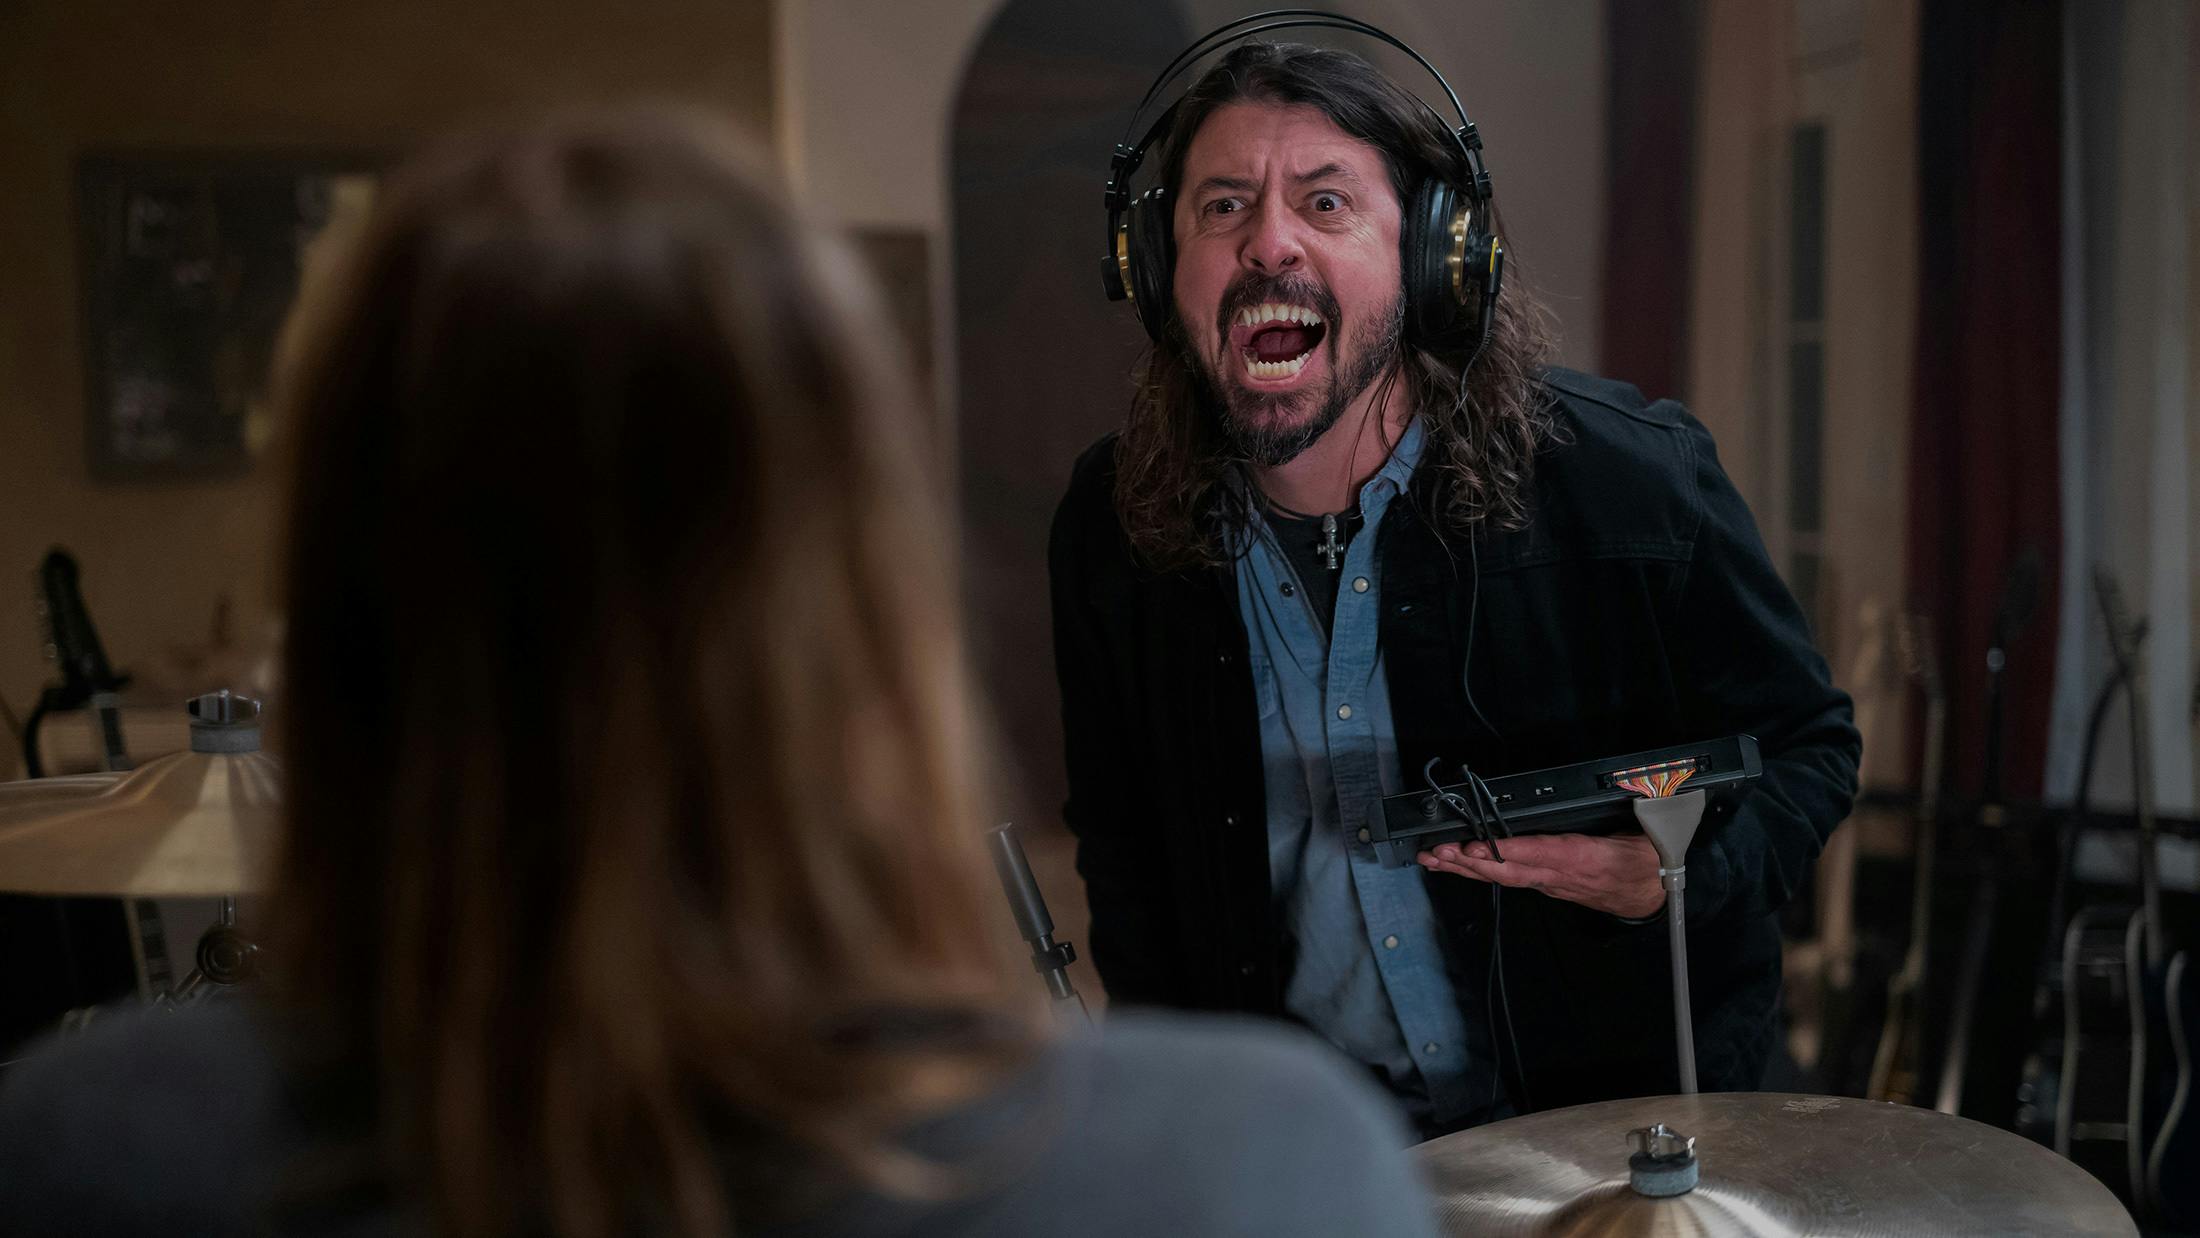 Dave Grohl: “You really have to let your guard down and show everybody your true dork”